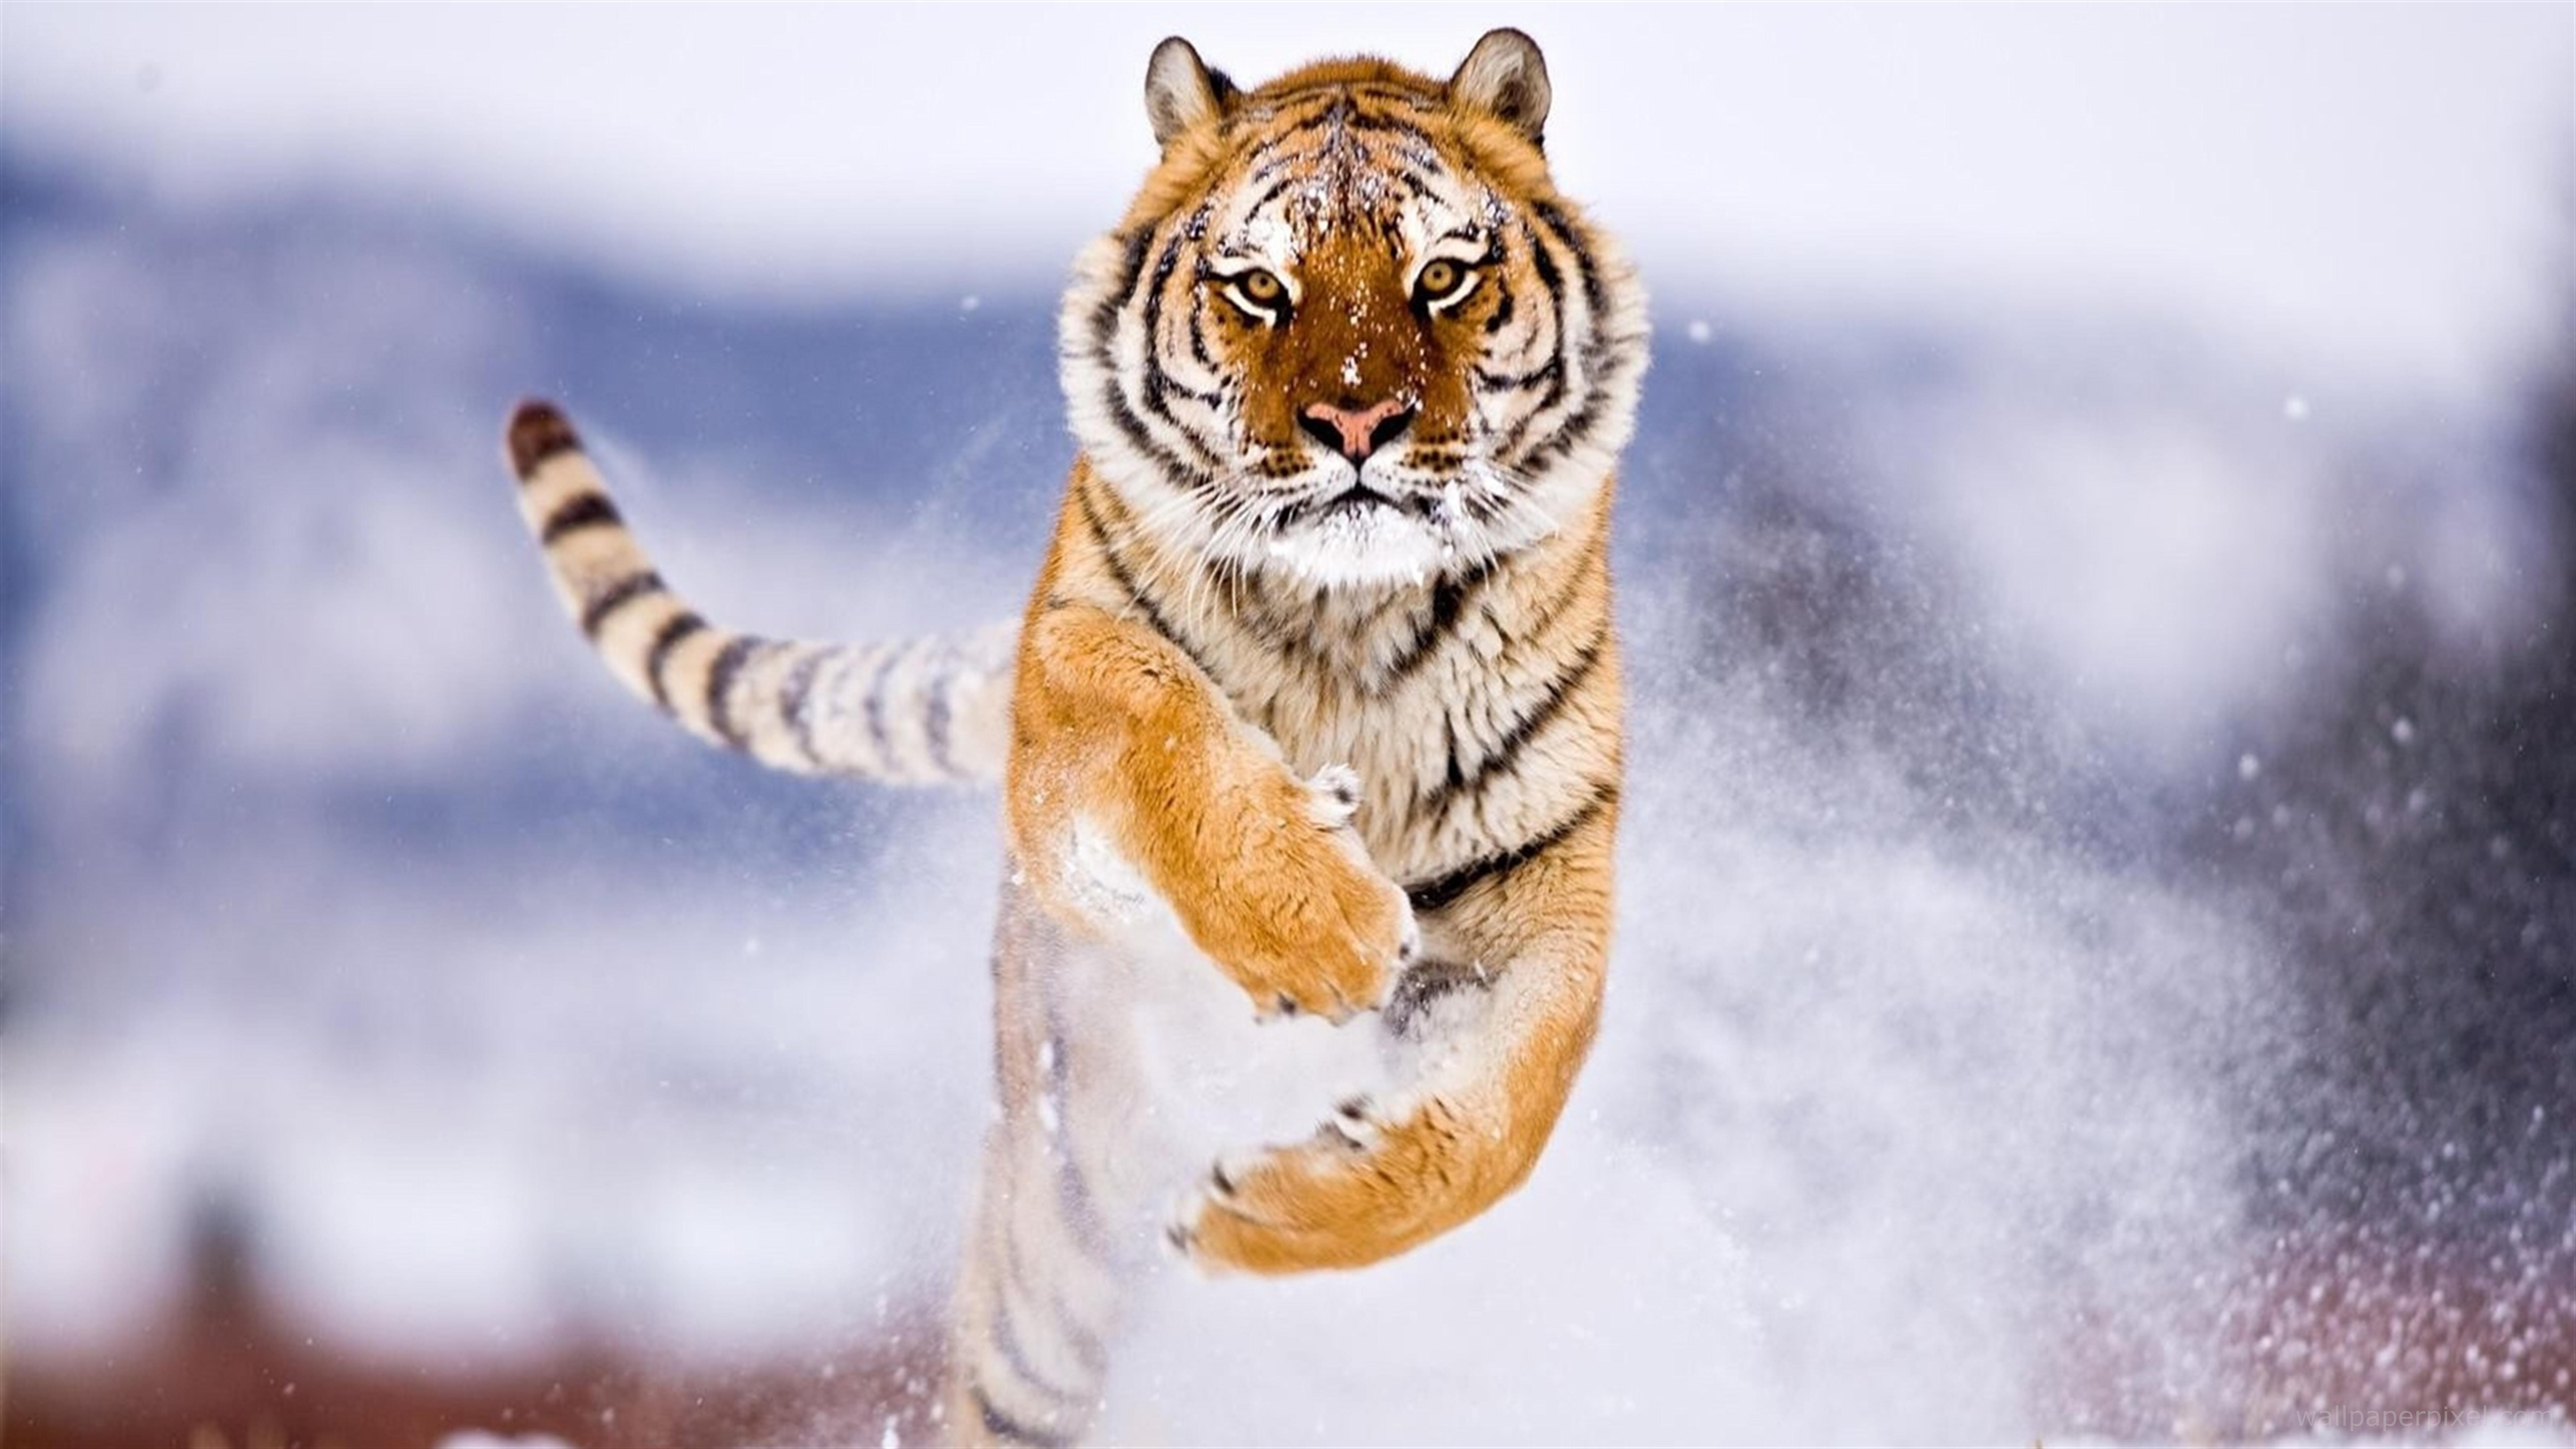 7680x4320 Tiger In Snow 8k HD 4k Wallpapers, Images, Backgrounds